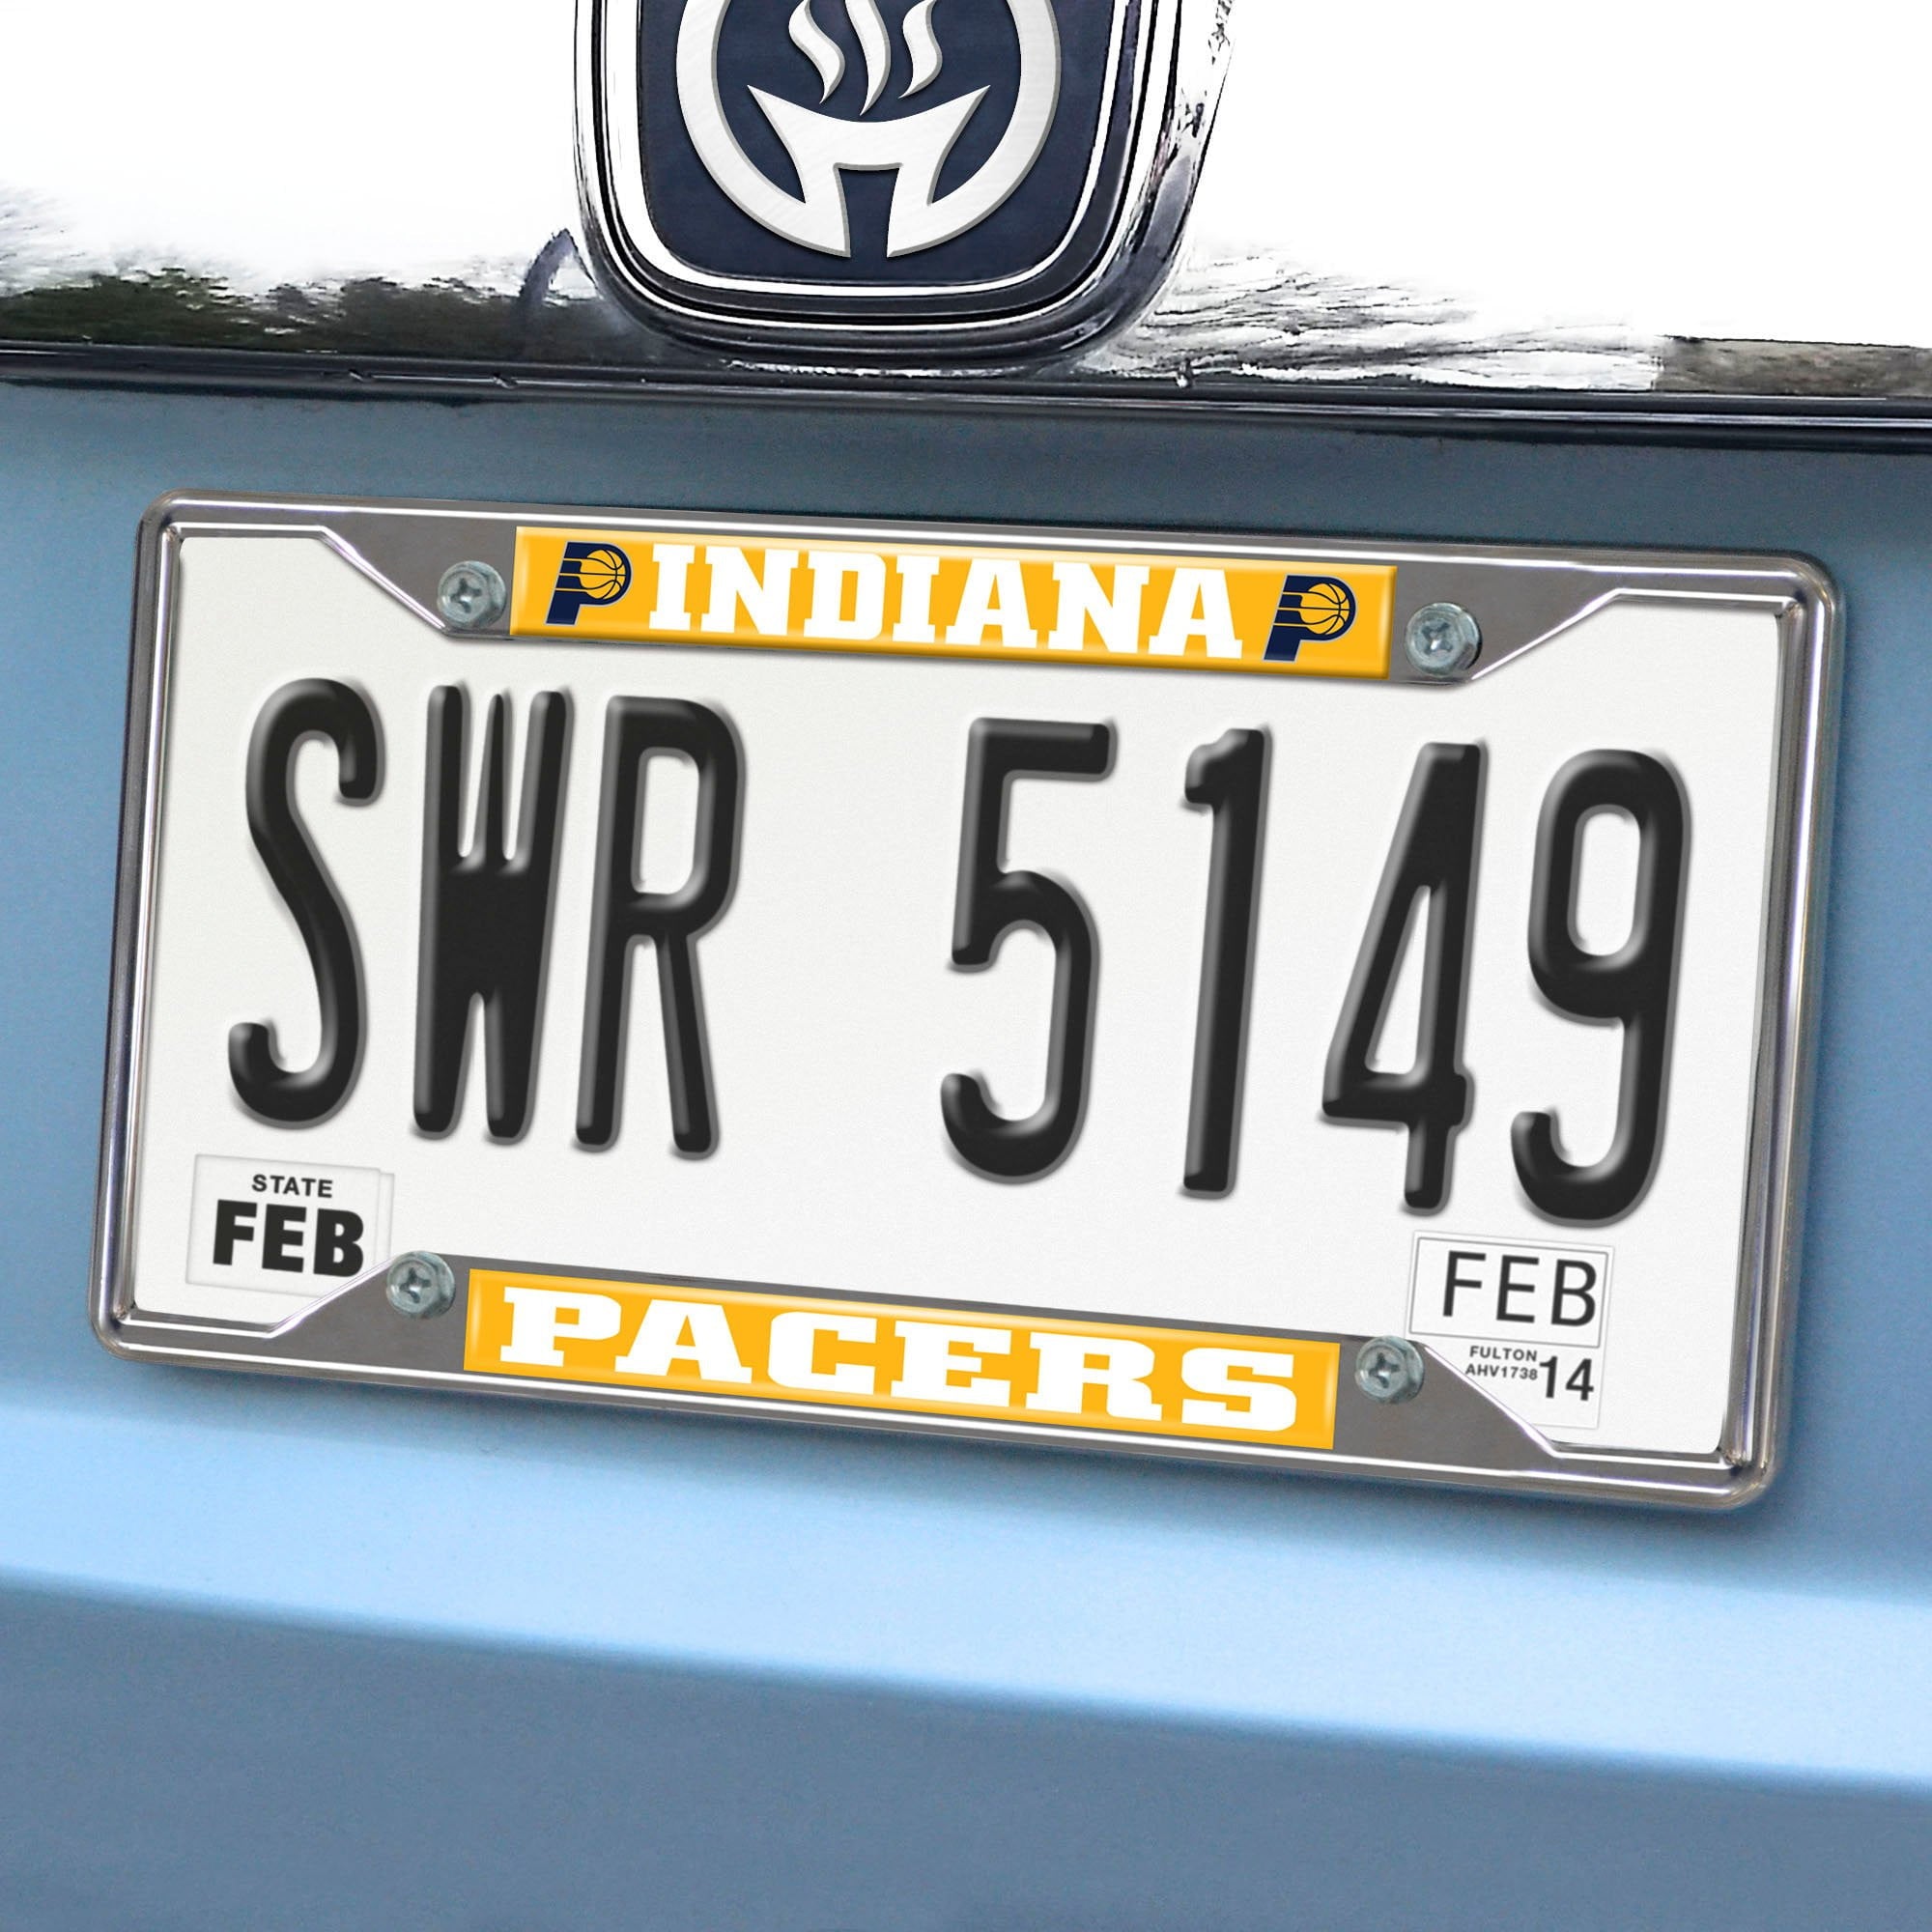 NBA - Indiana Pacers License Plate Frame